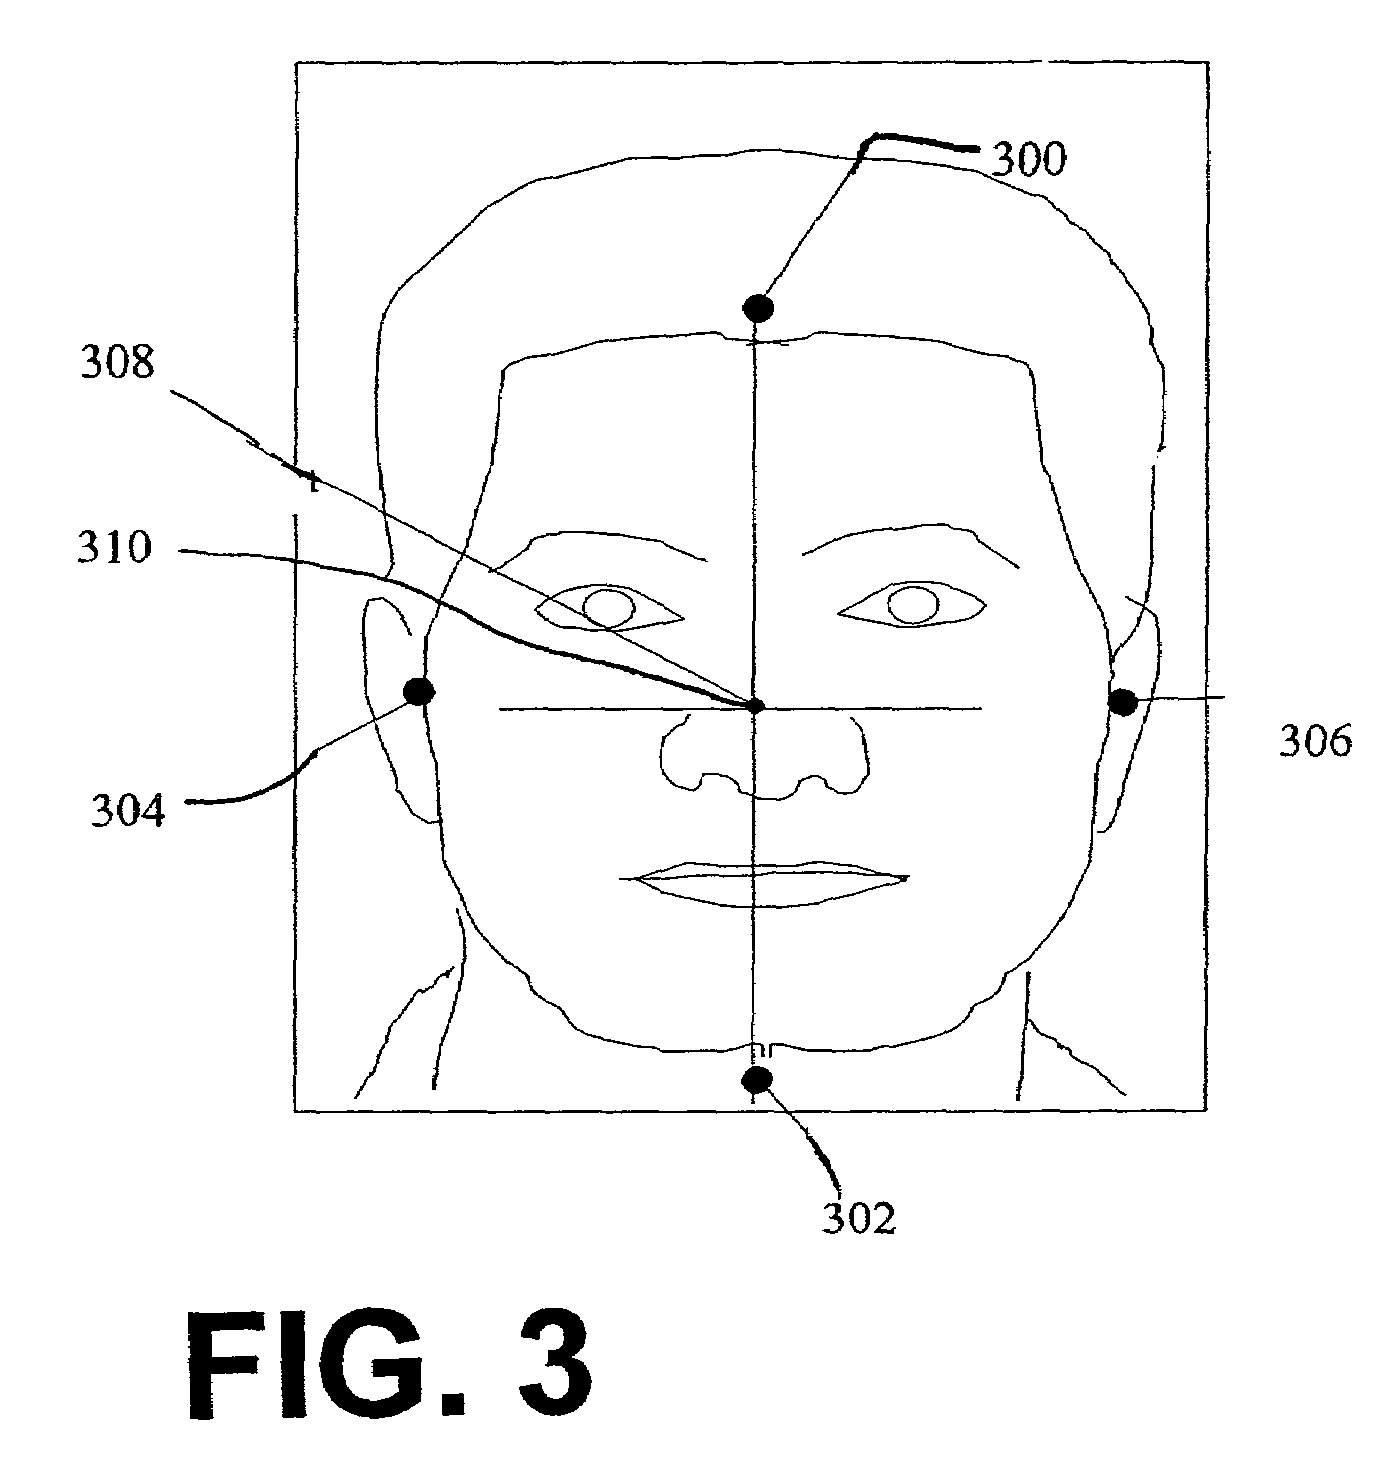 Method for detecting eye and mouth positions in a digital image